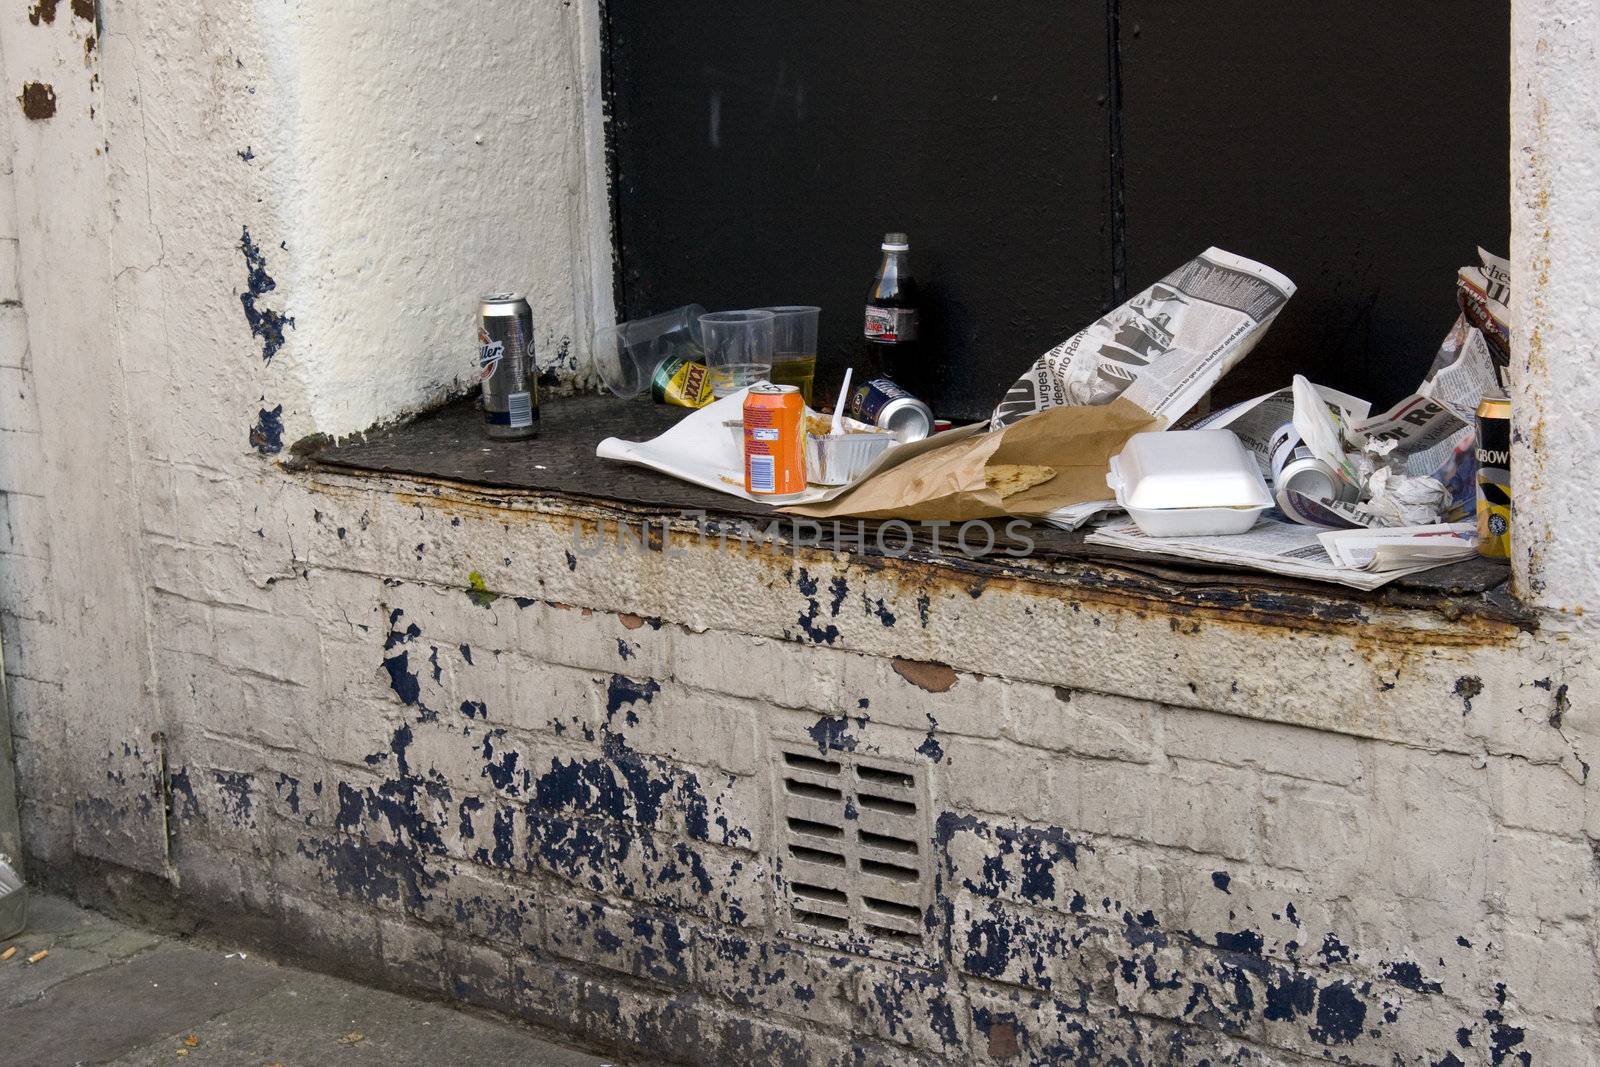 Rubbish left on a wall in an urban environment